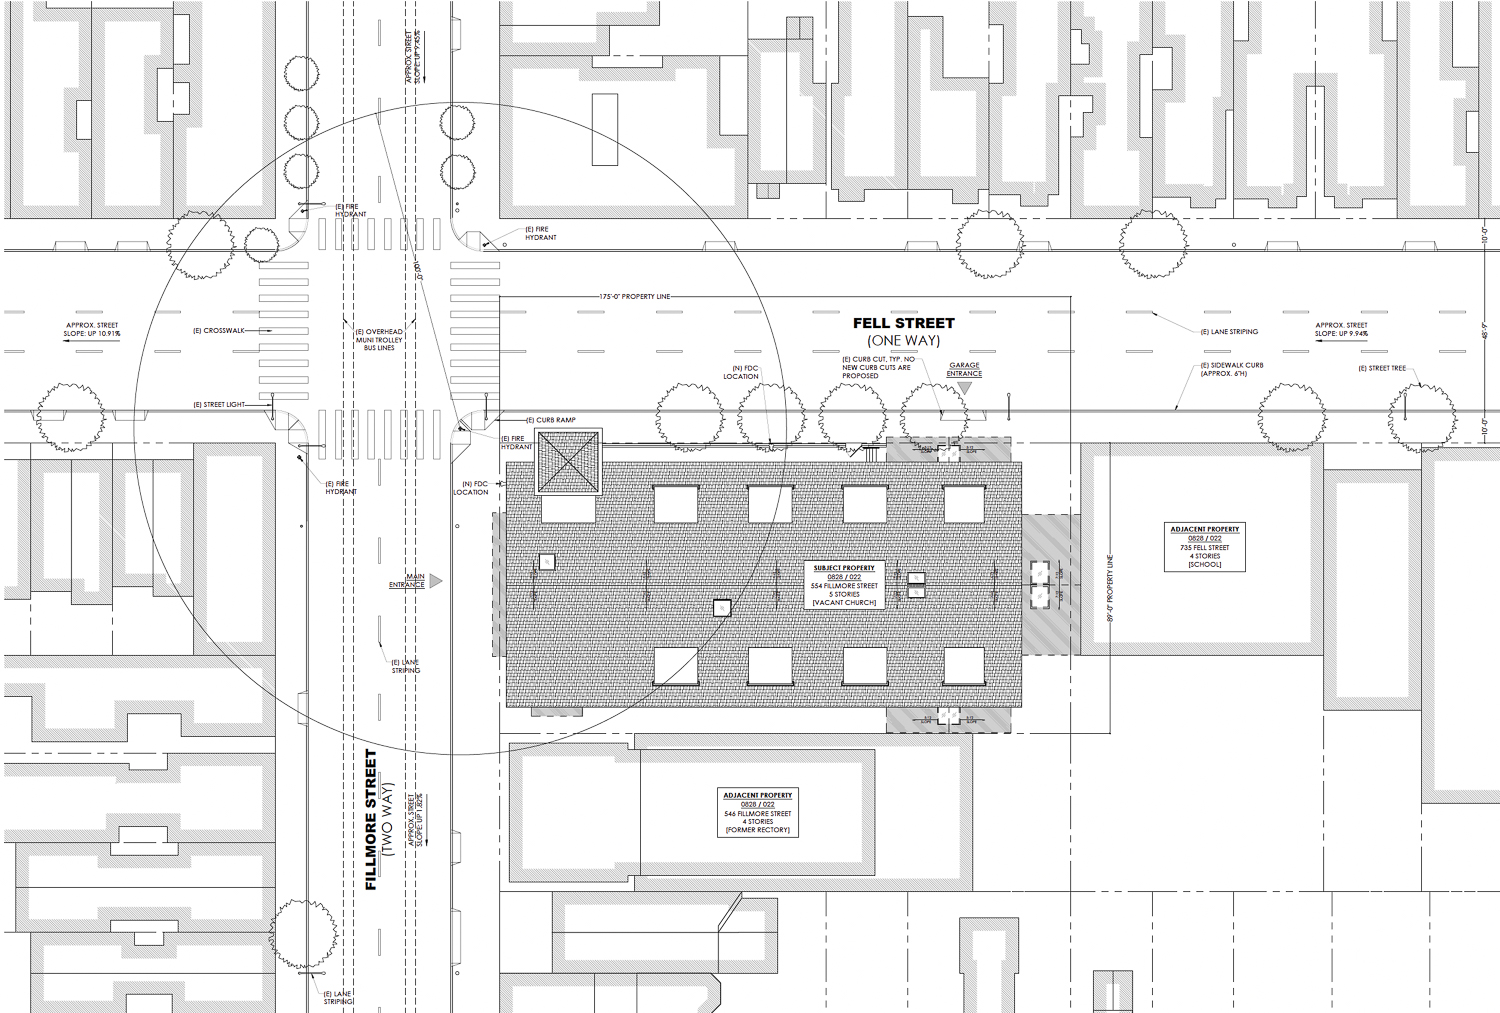 554 Fillmore Street site map, illustration by Architects SF